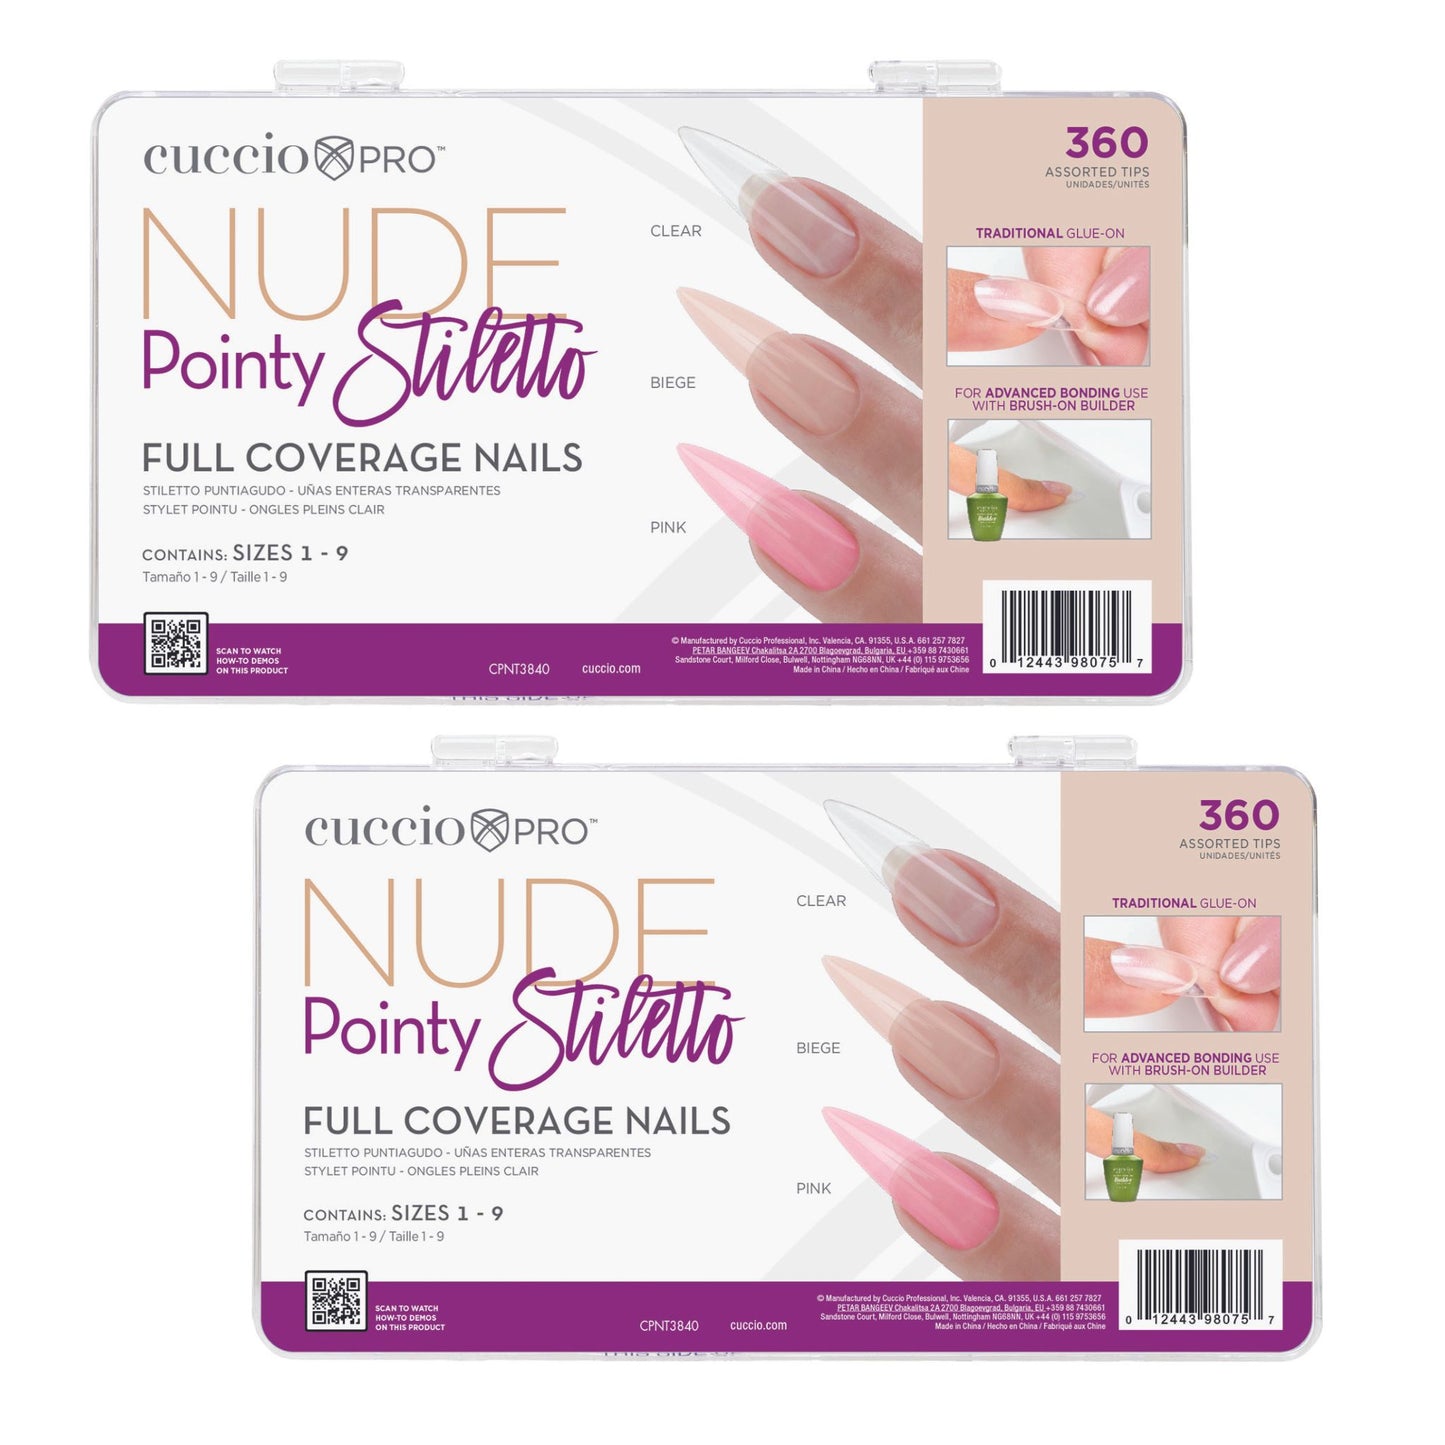 Bundle: 2 Full Coverage Nail Tips -Nude Stiletto Ultra Clear & Nude - 720 Count